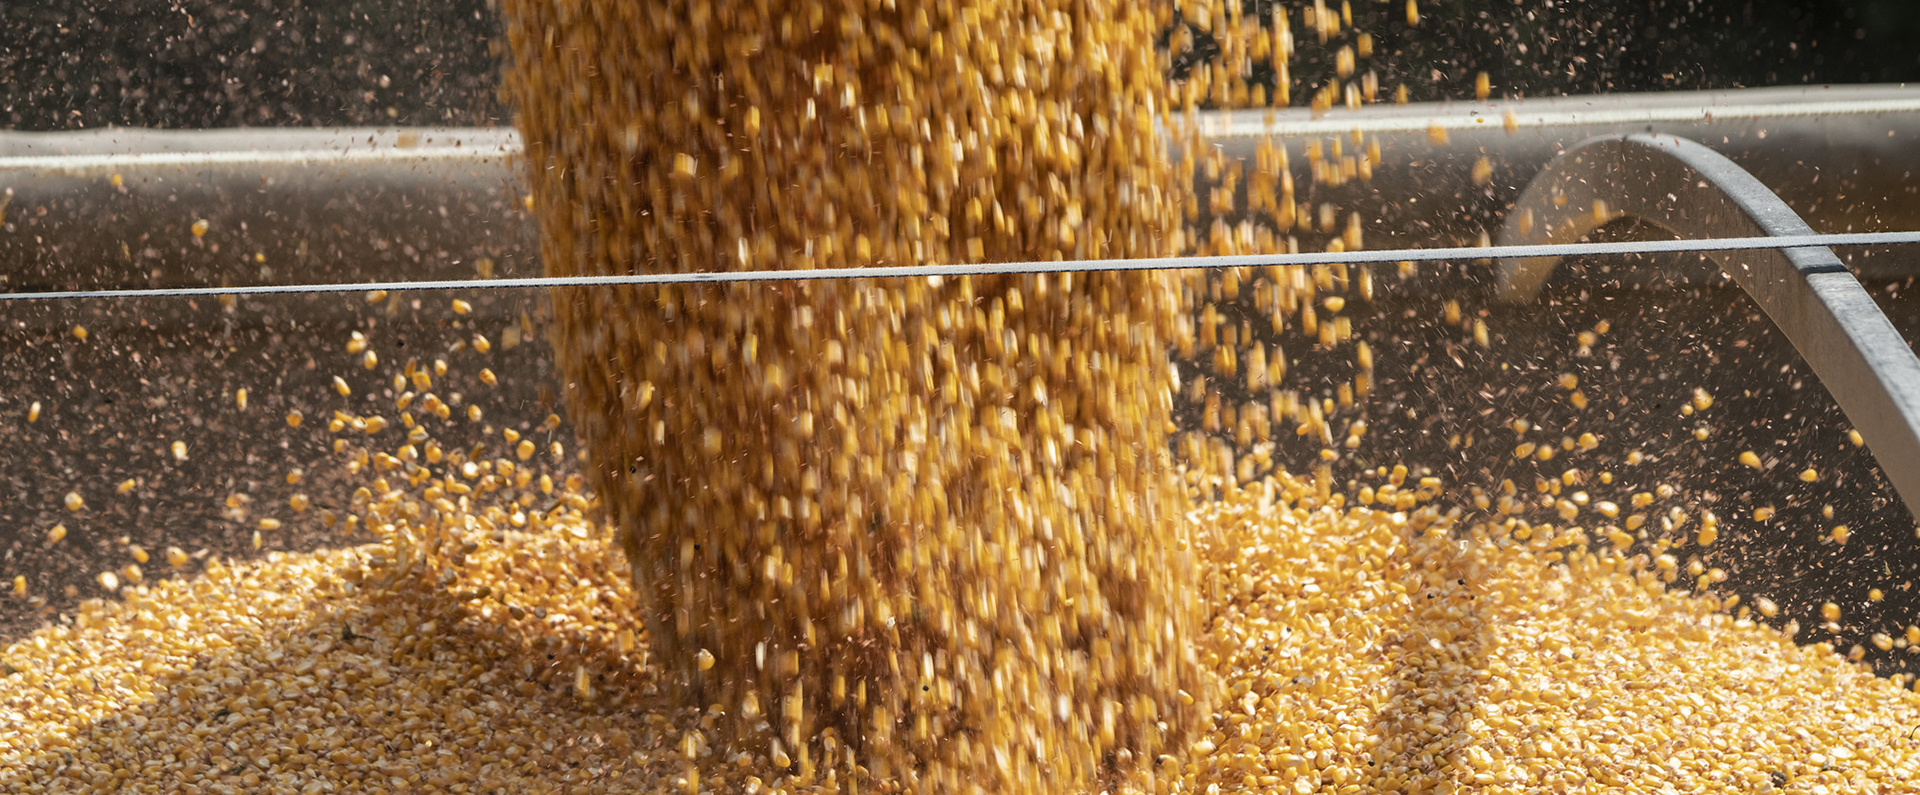 Corn being poured into a vat